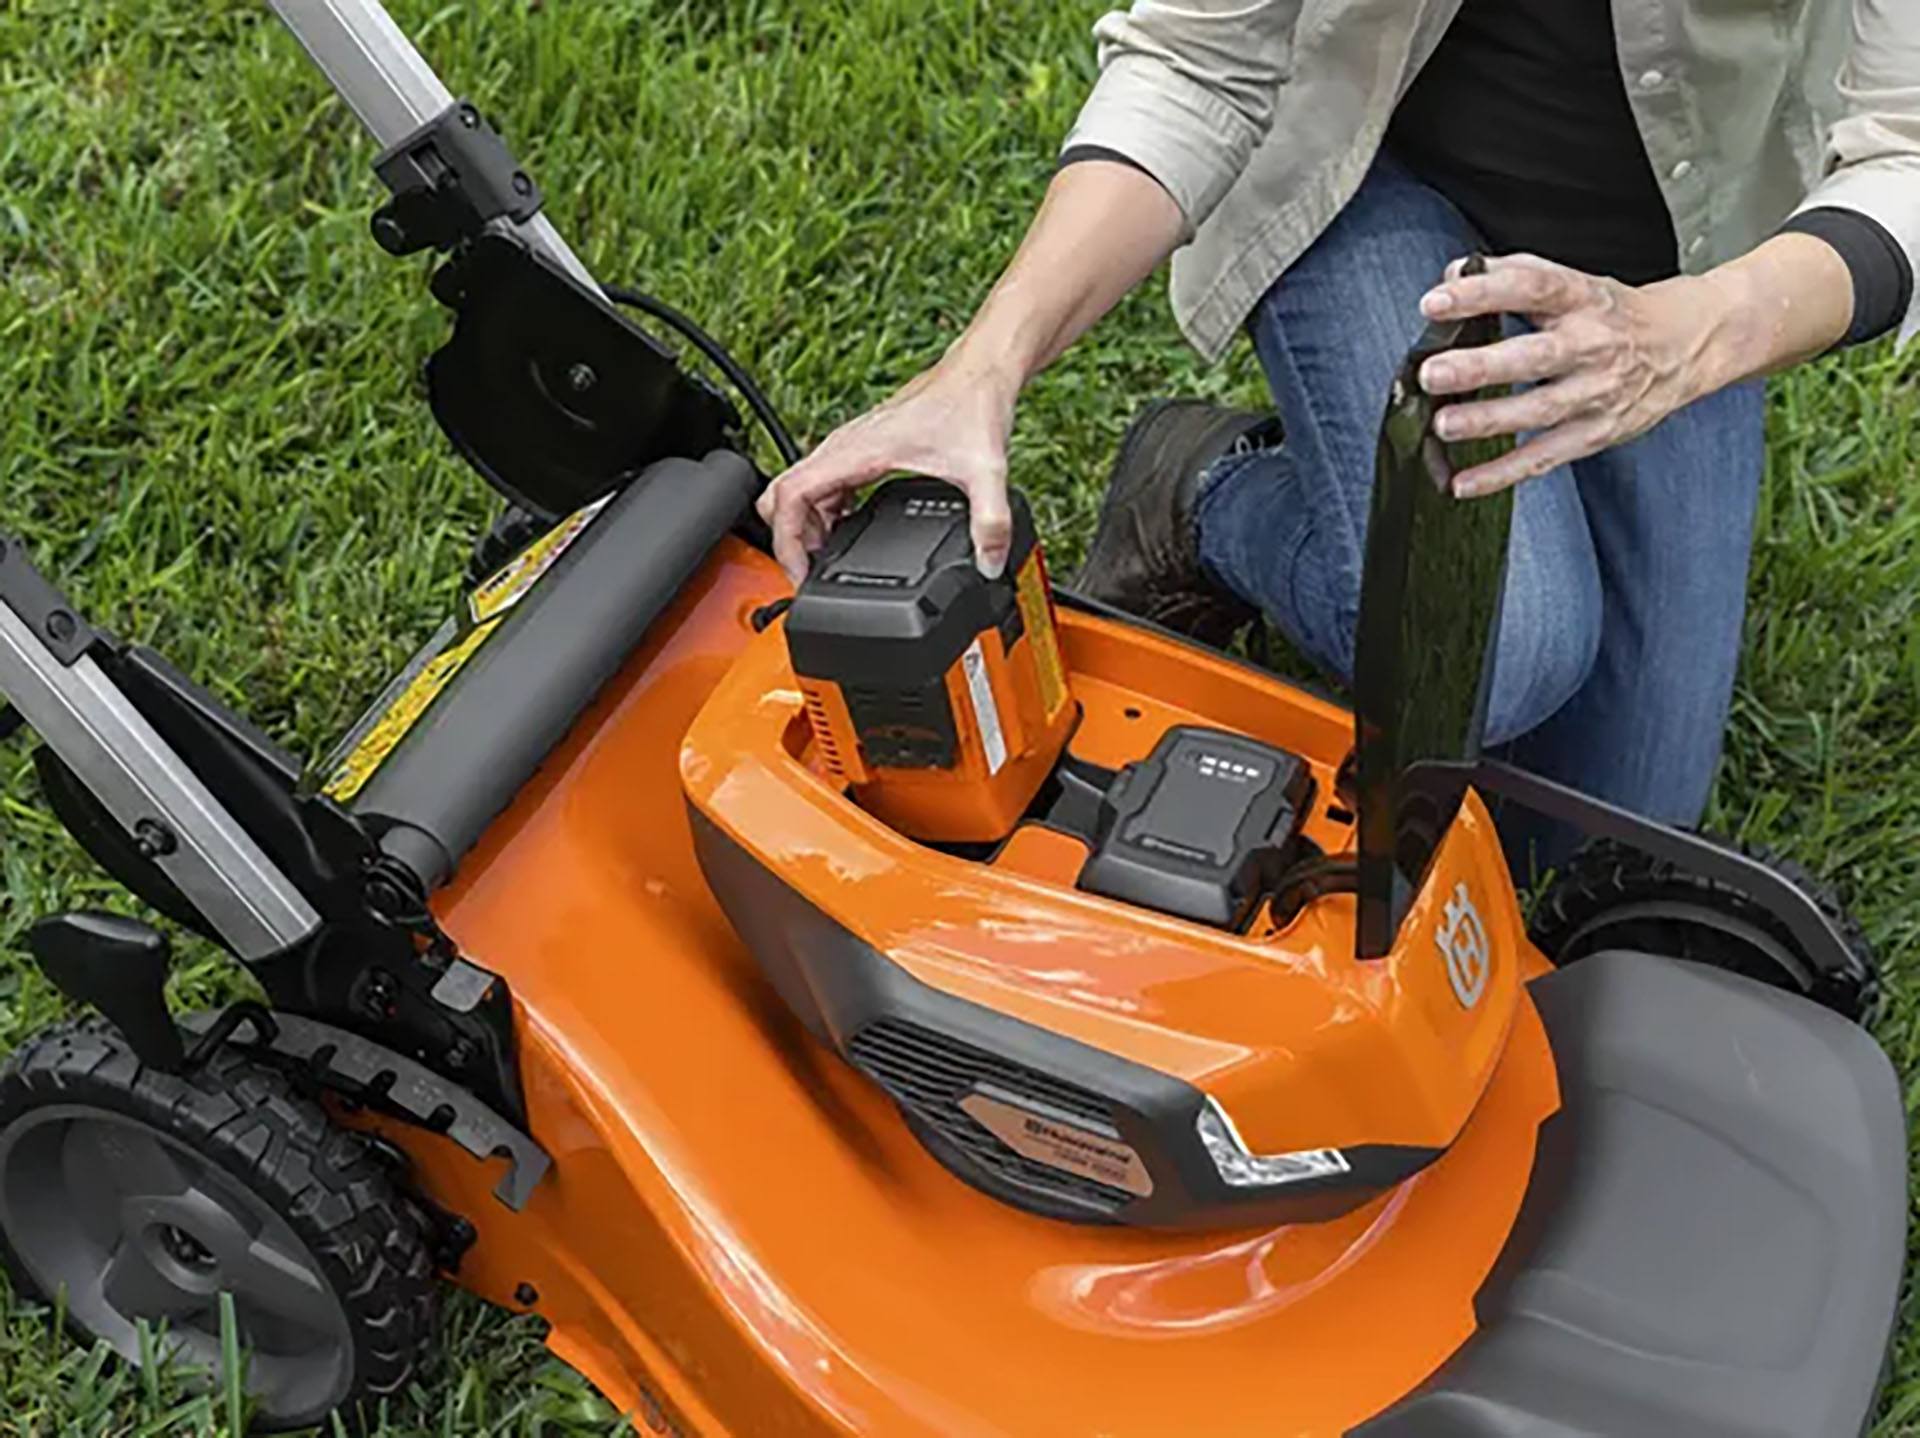 Husqvarna Power Equipment Lawn Xpert 21 in. LE-322 (tool only) in Chester, Vermont - Photo 8